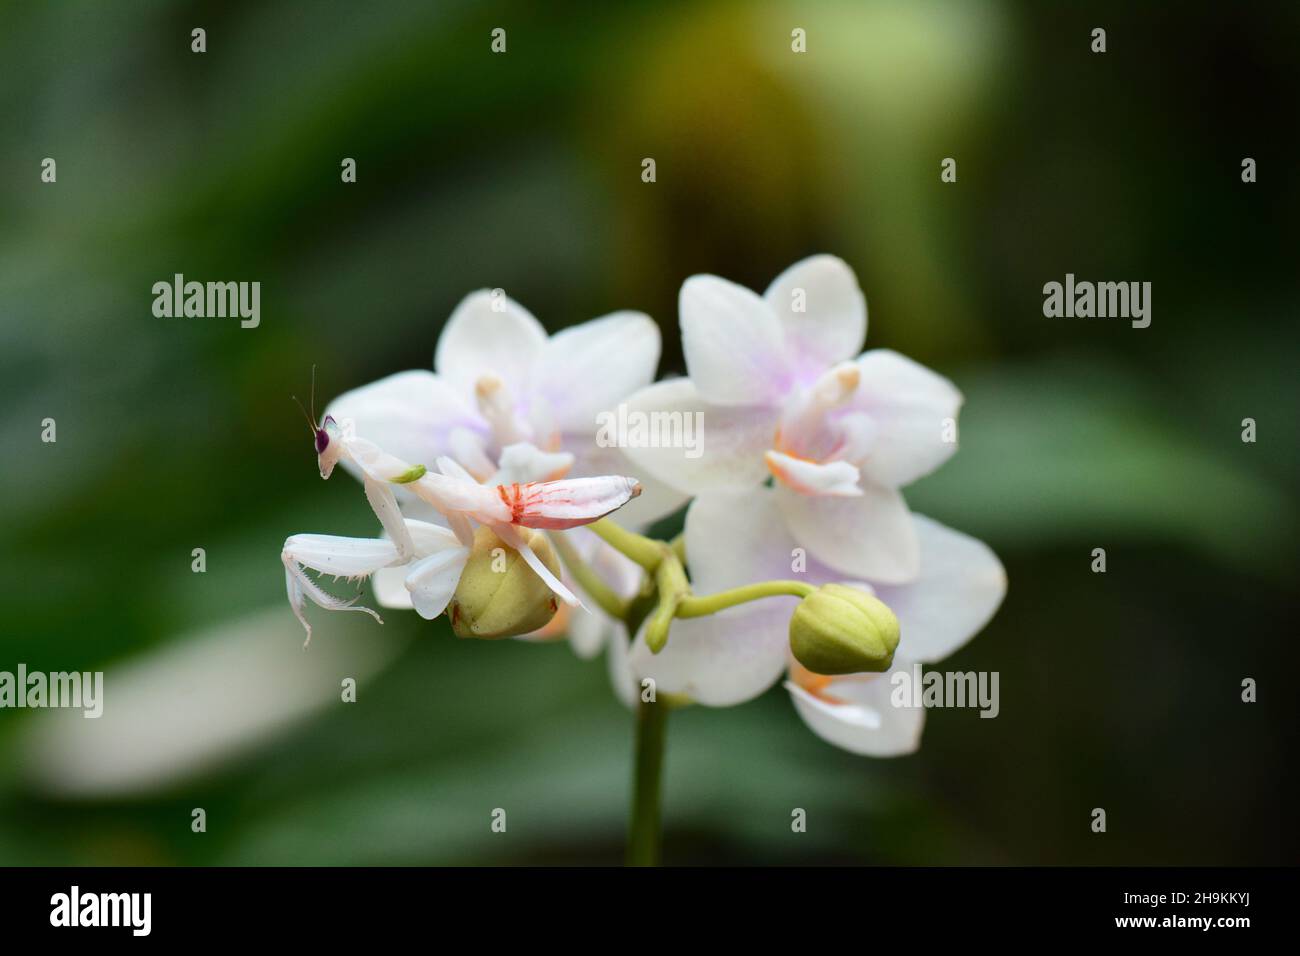 Walking Flower Mantis High Resolution Stock Photography and Images - Alamy